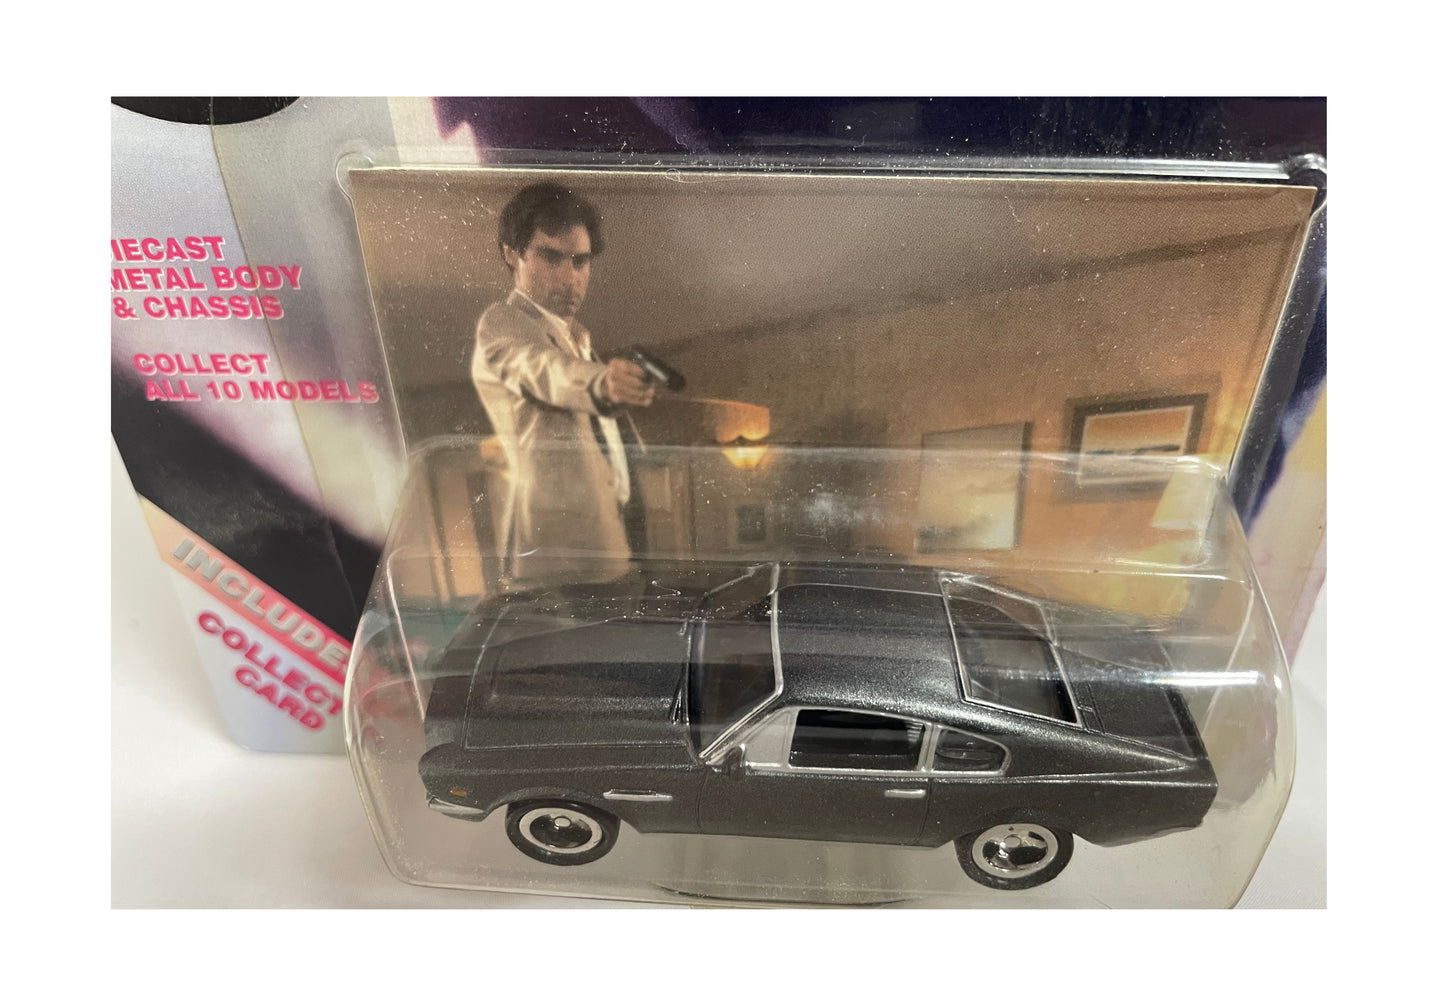 Vintage 1999 Corgi James Bond 007 - The Living Daylights - Aston Martin V8 Vantage Volante 1:65 Scale Die-Cast Vehicle Replica Number 99658 - Includes Free Collectors Card - Brand New Factory Sealed Shop Stock Room Find